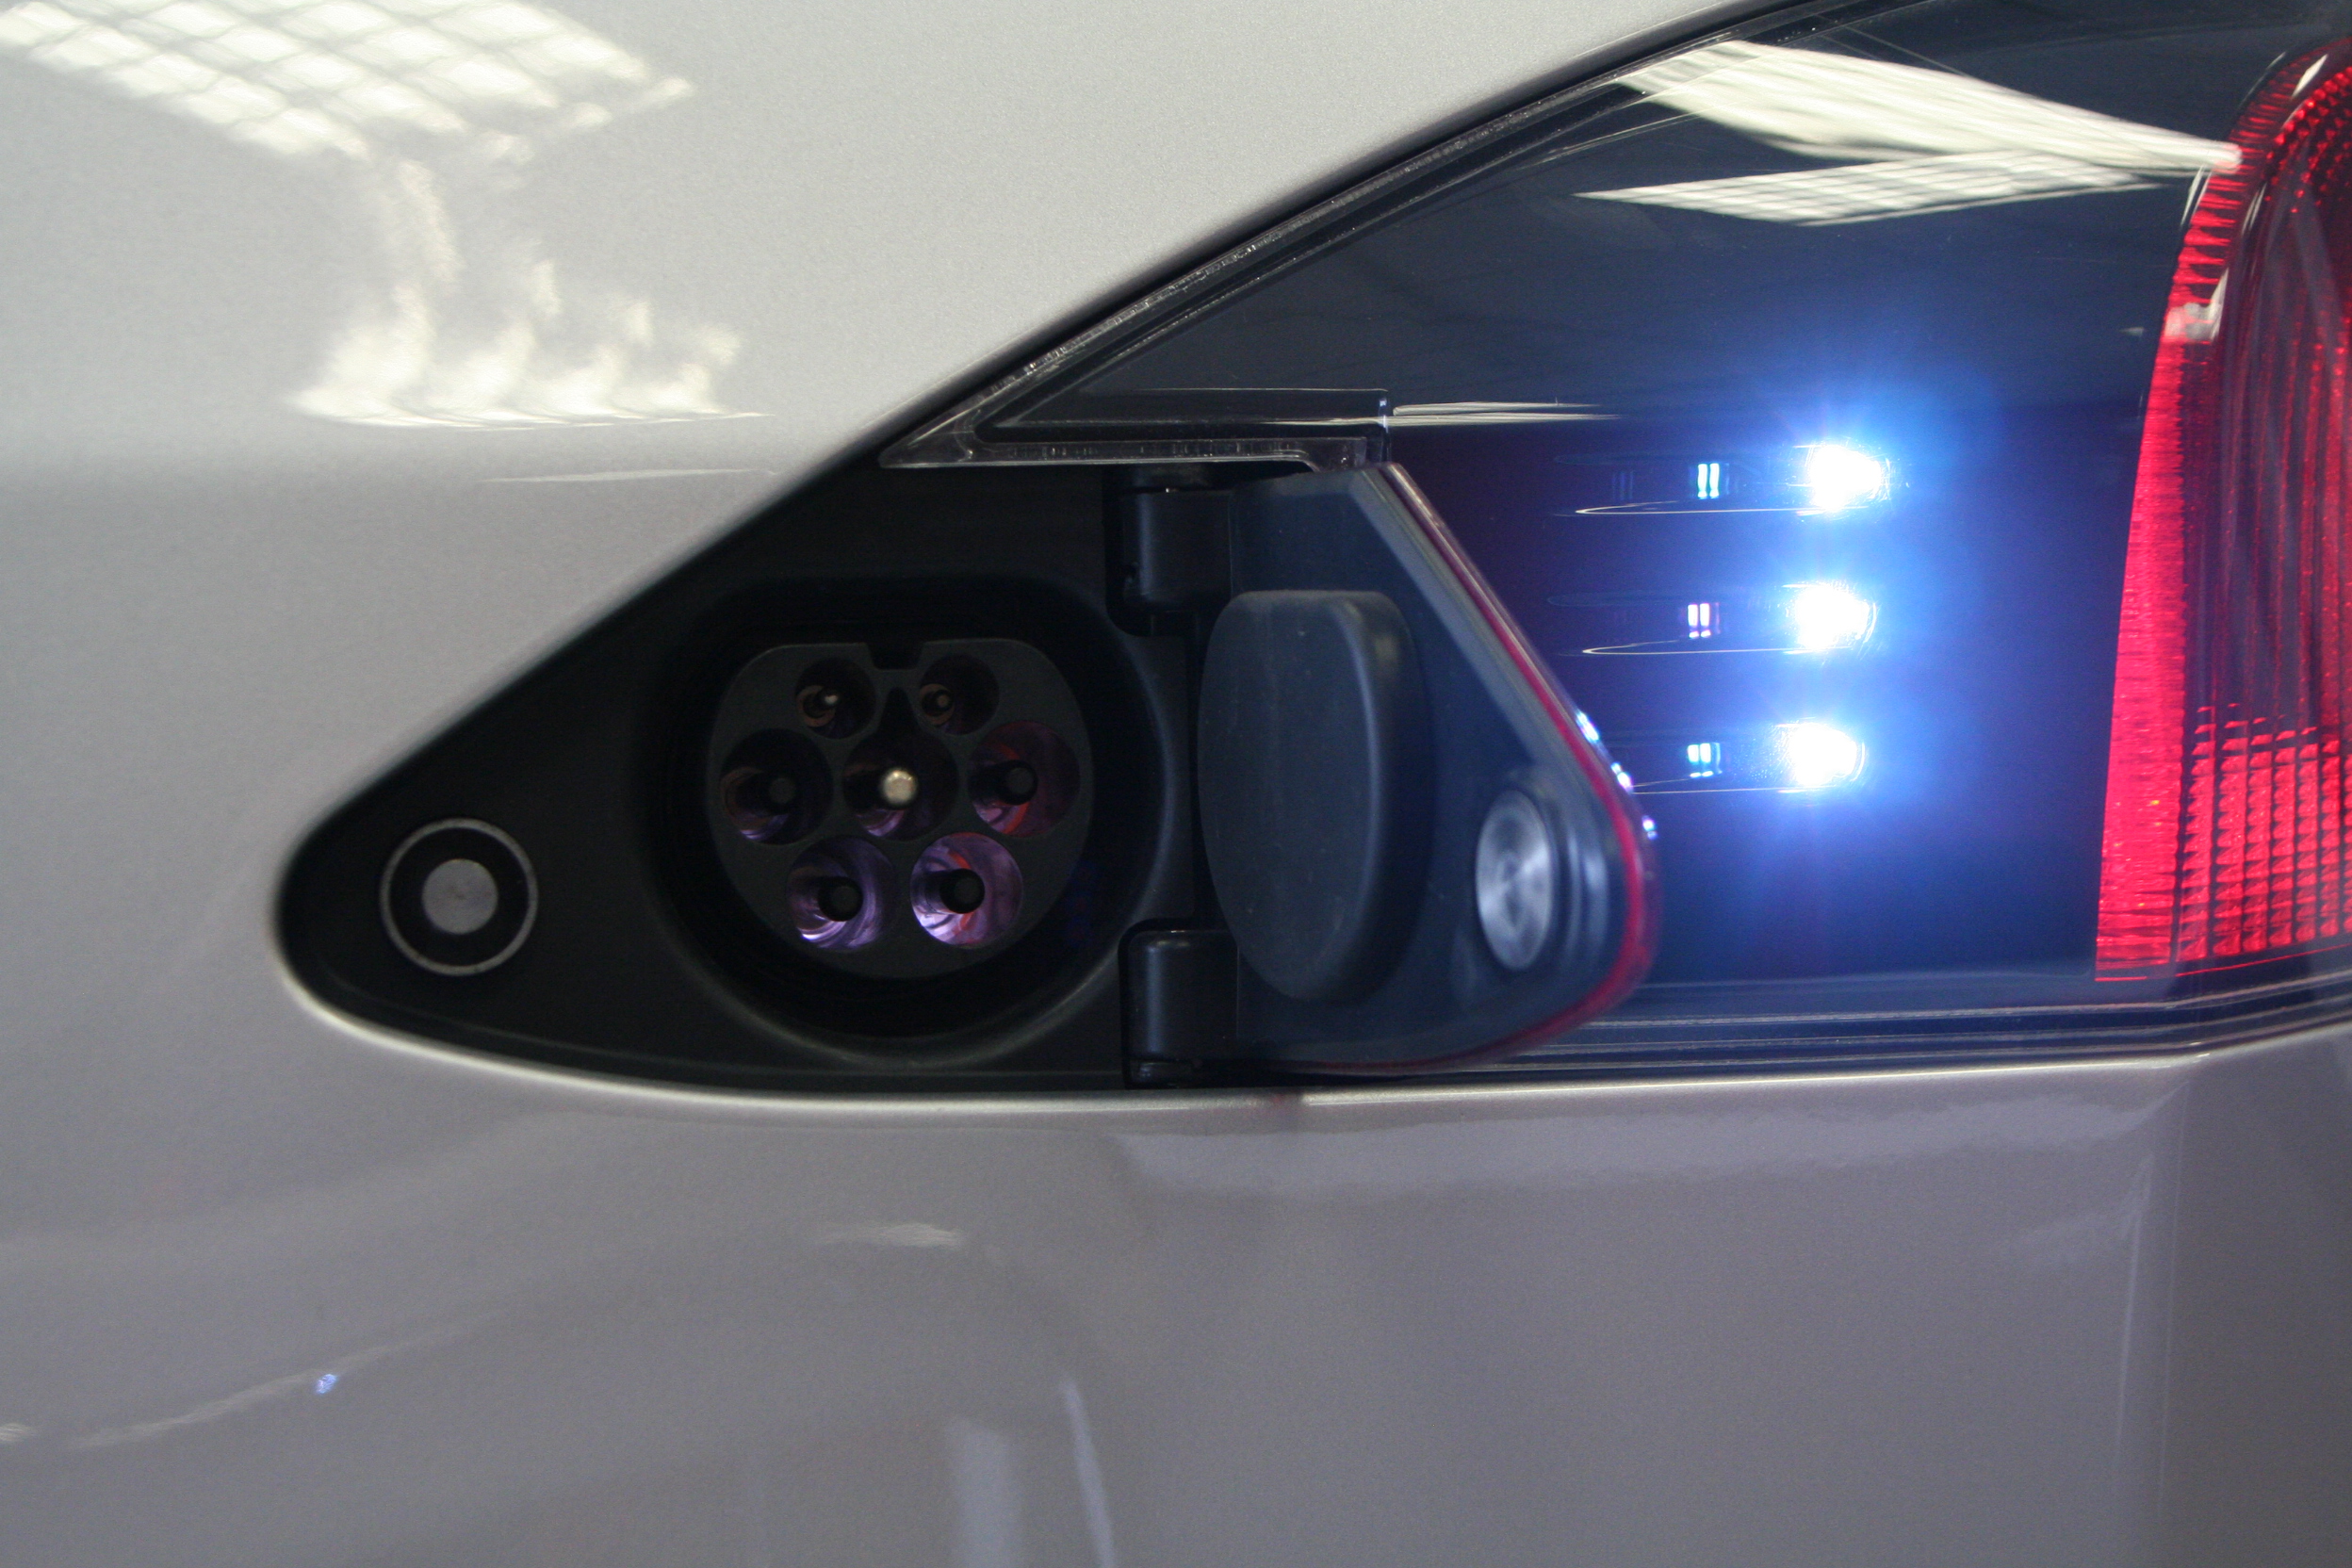 An EV charge port with multicolored lights